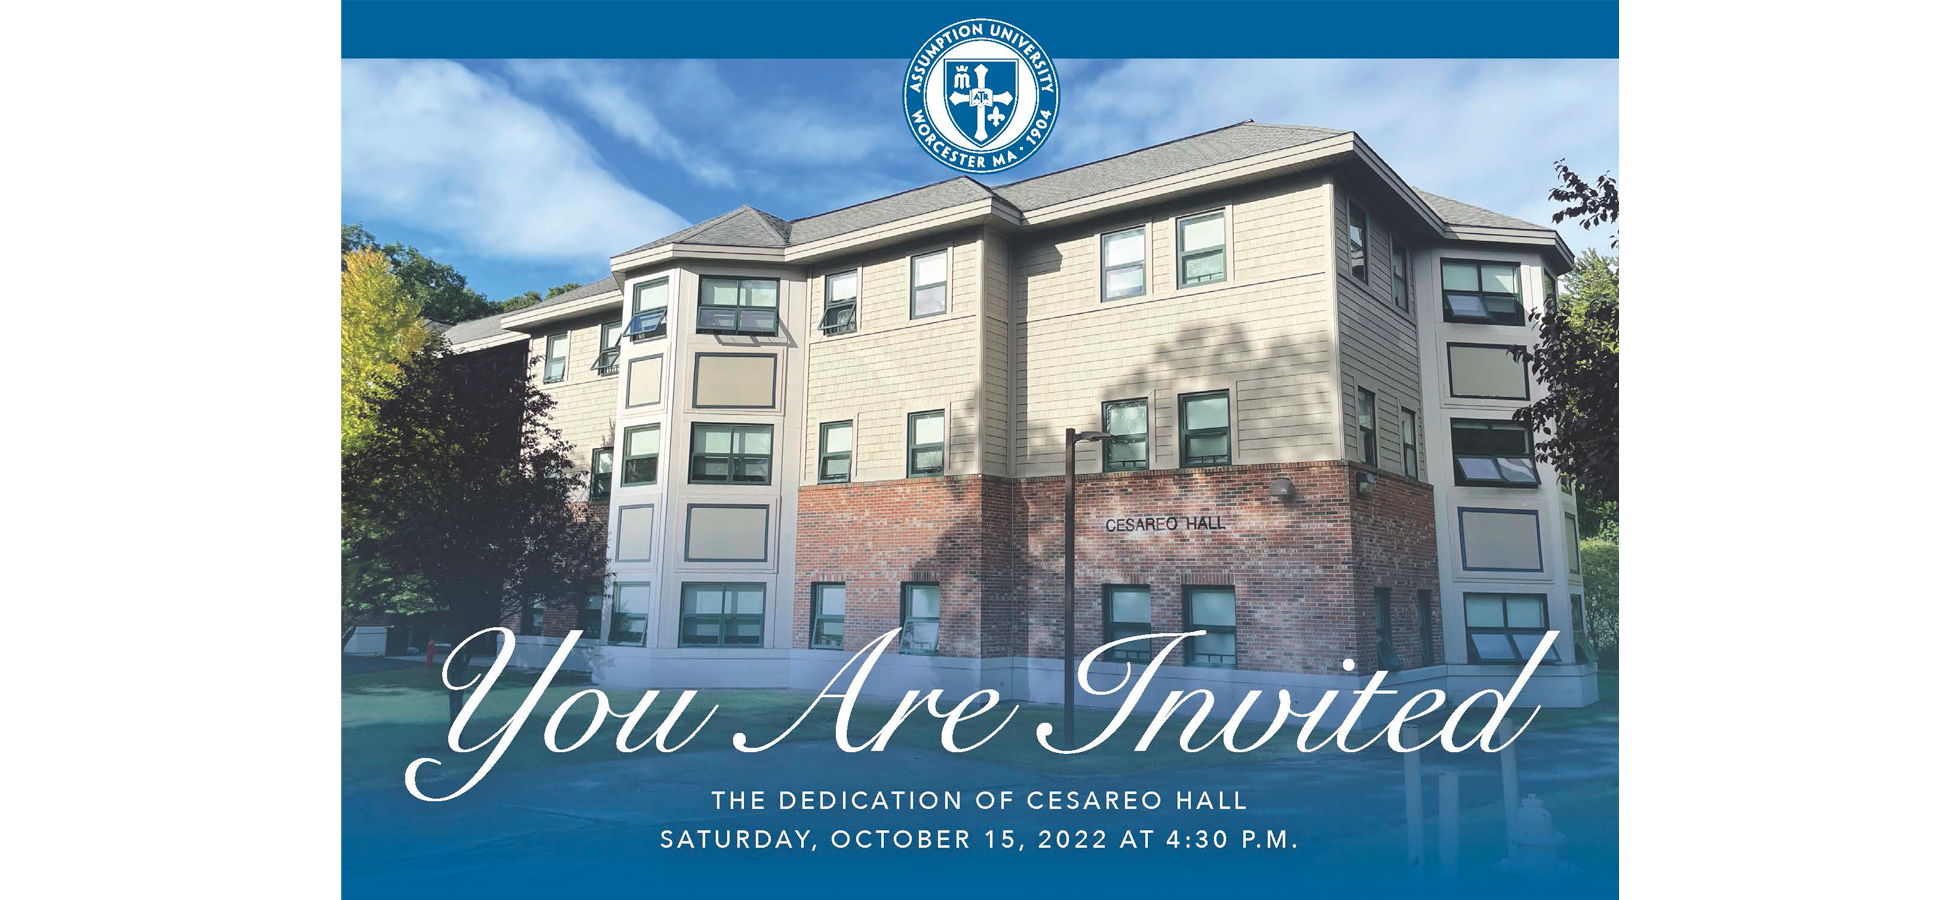 You are invited to attend the dedication of Cesareo Hall on Saturday, October 15 on the campus of Assumption University